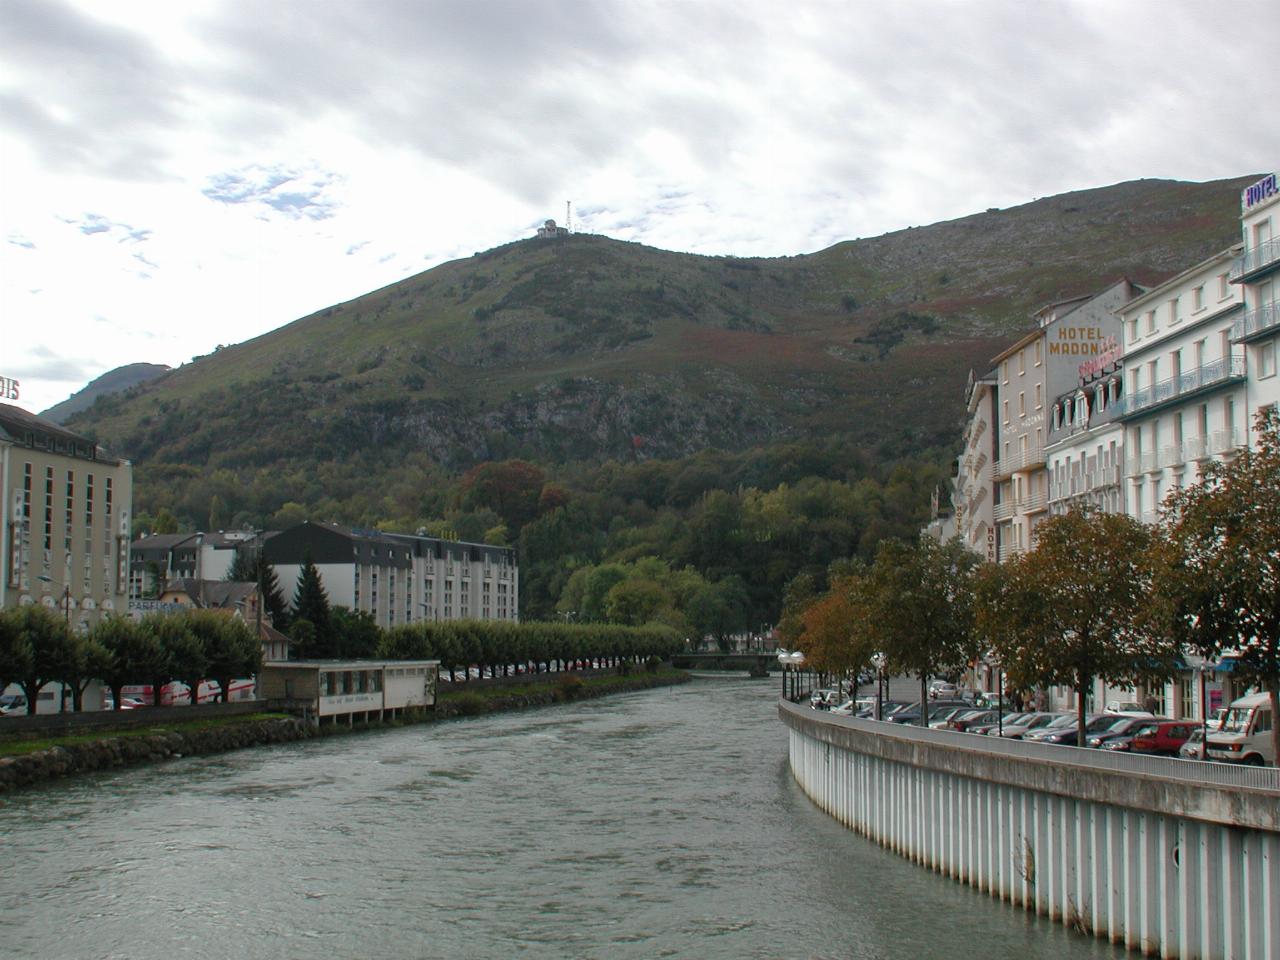 The river in Lourdes; quite fast flowing